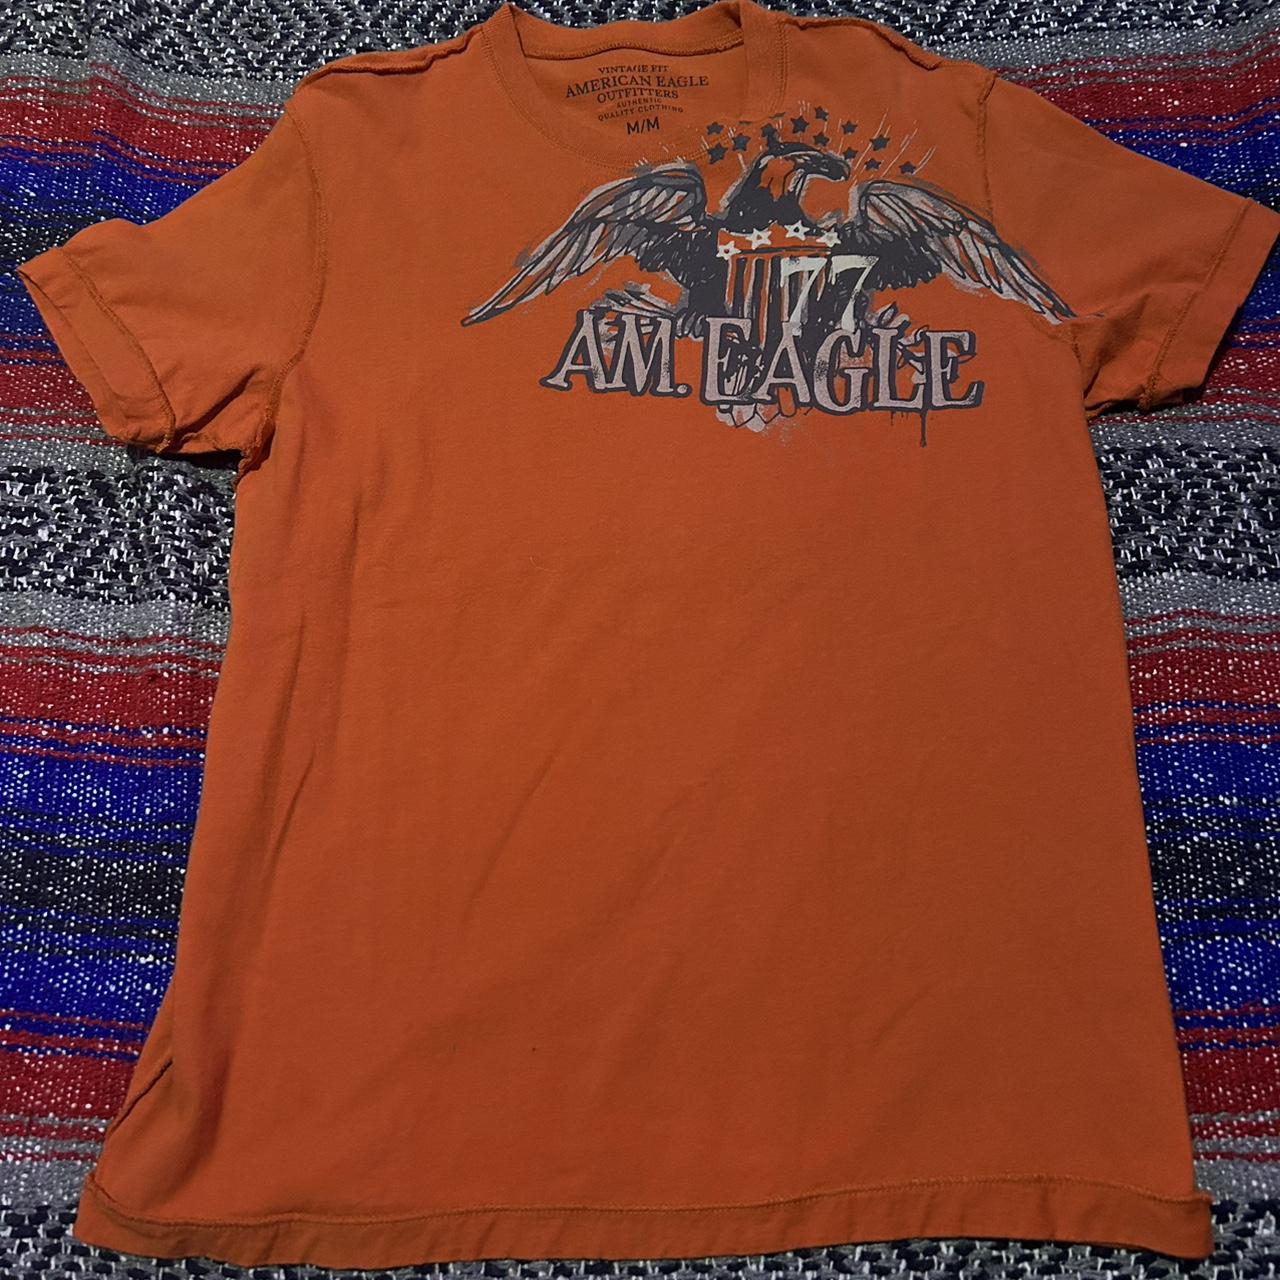 Vintage American eagle tee, Great condition and great